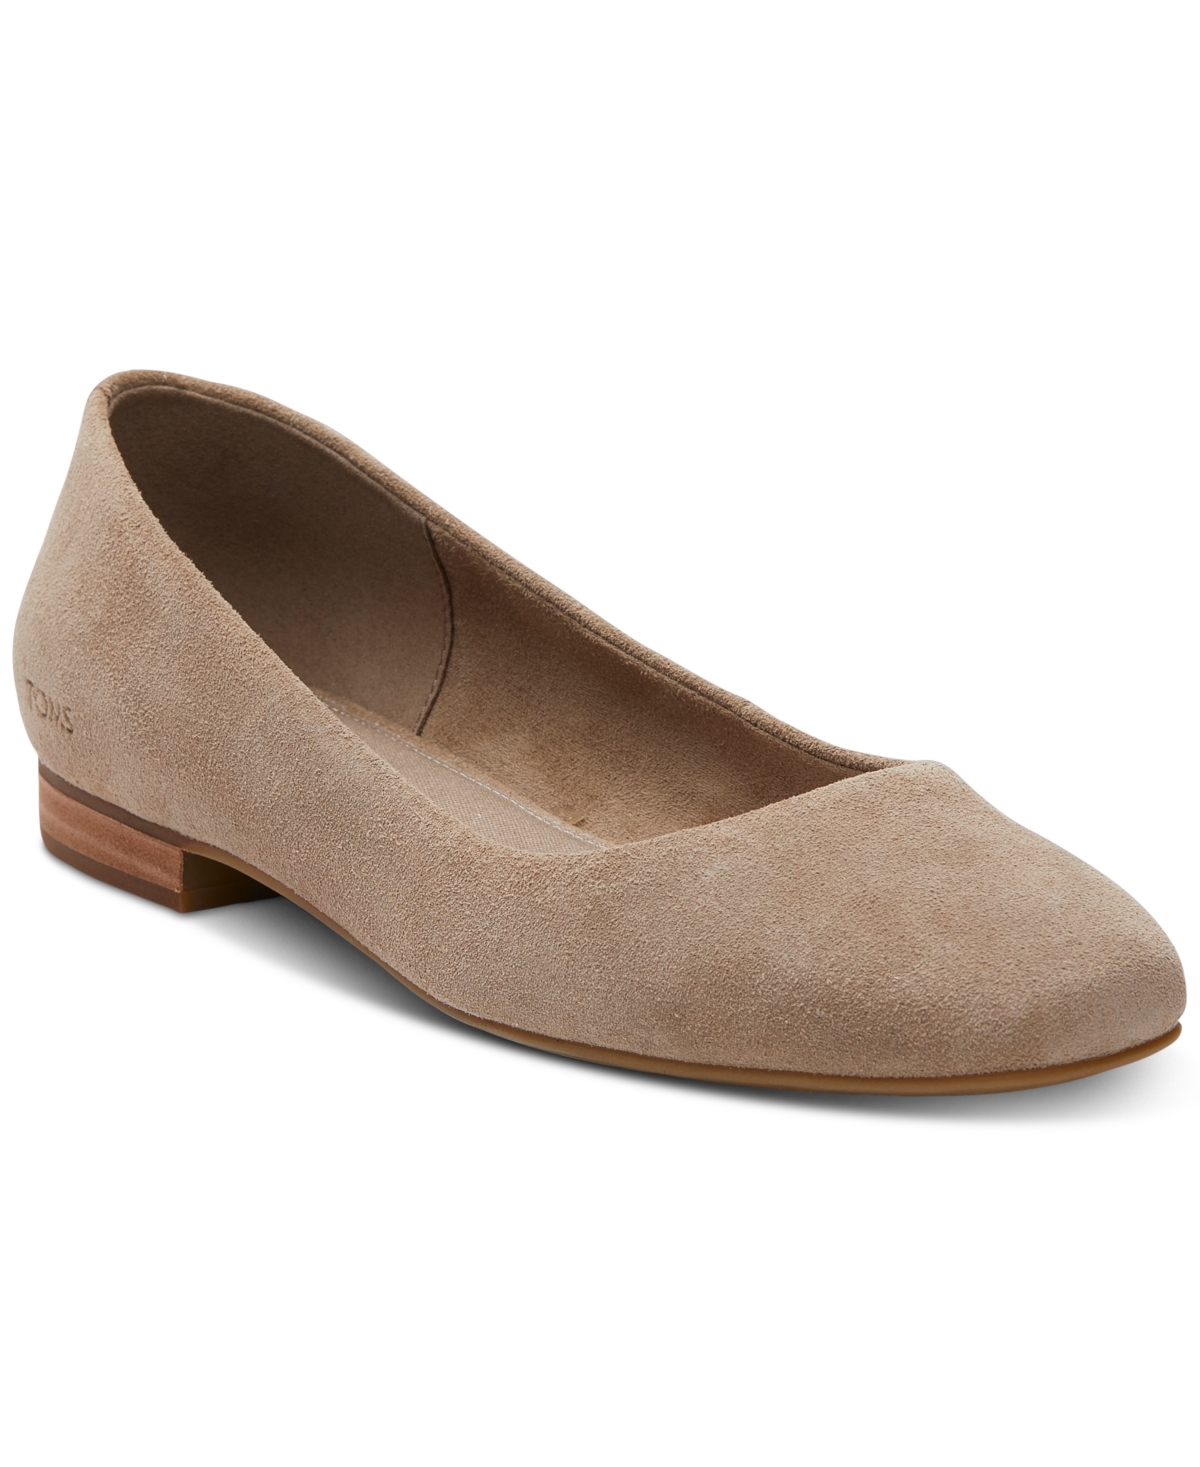 Toms Women's Briella Square-toe Slip-on Ballet Flats In Dune Suede